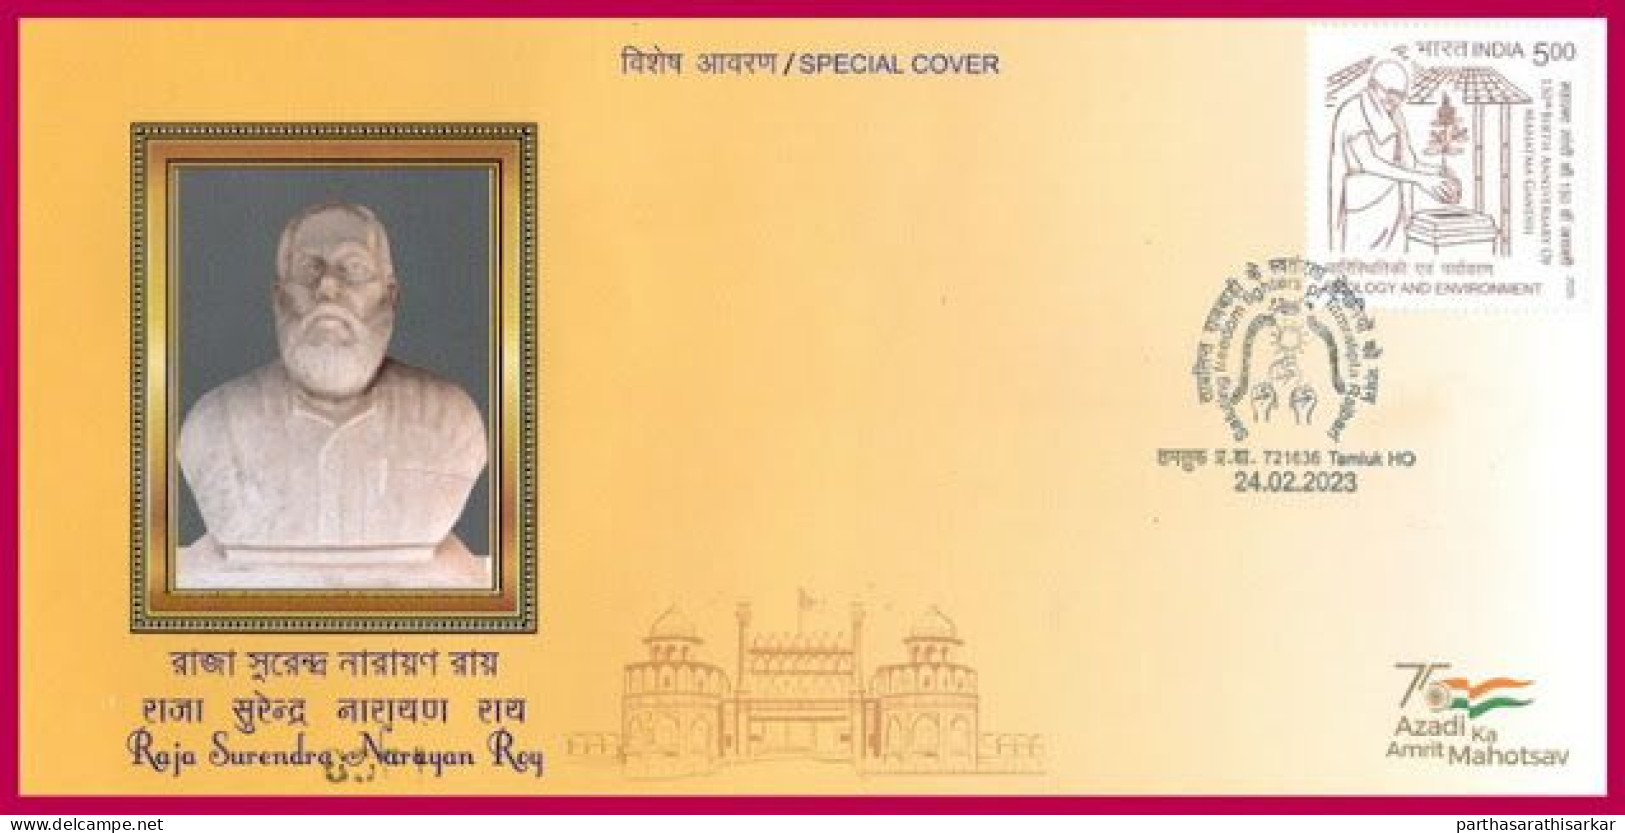 INDIA 2023 RAJA SURENDRA NARAYAN ROY FREEDOM FIGHTER SPECIAL COVER ISSUED BY INDIA POST USED RARE - Covers & Documents